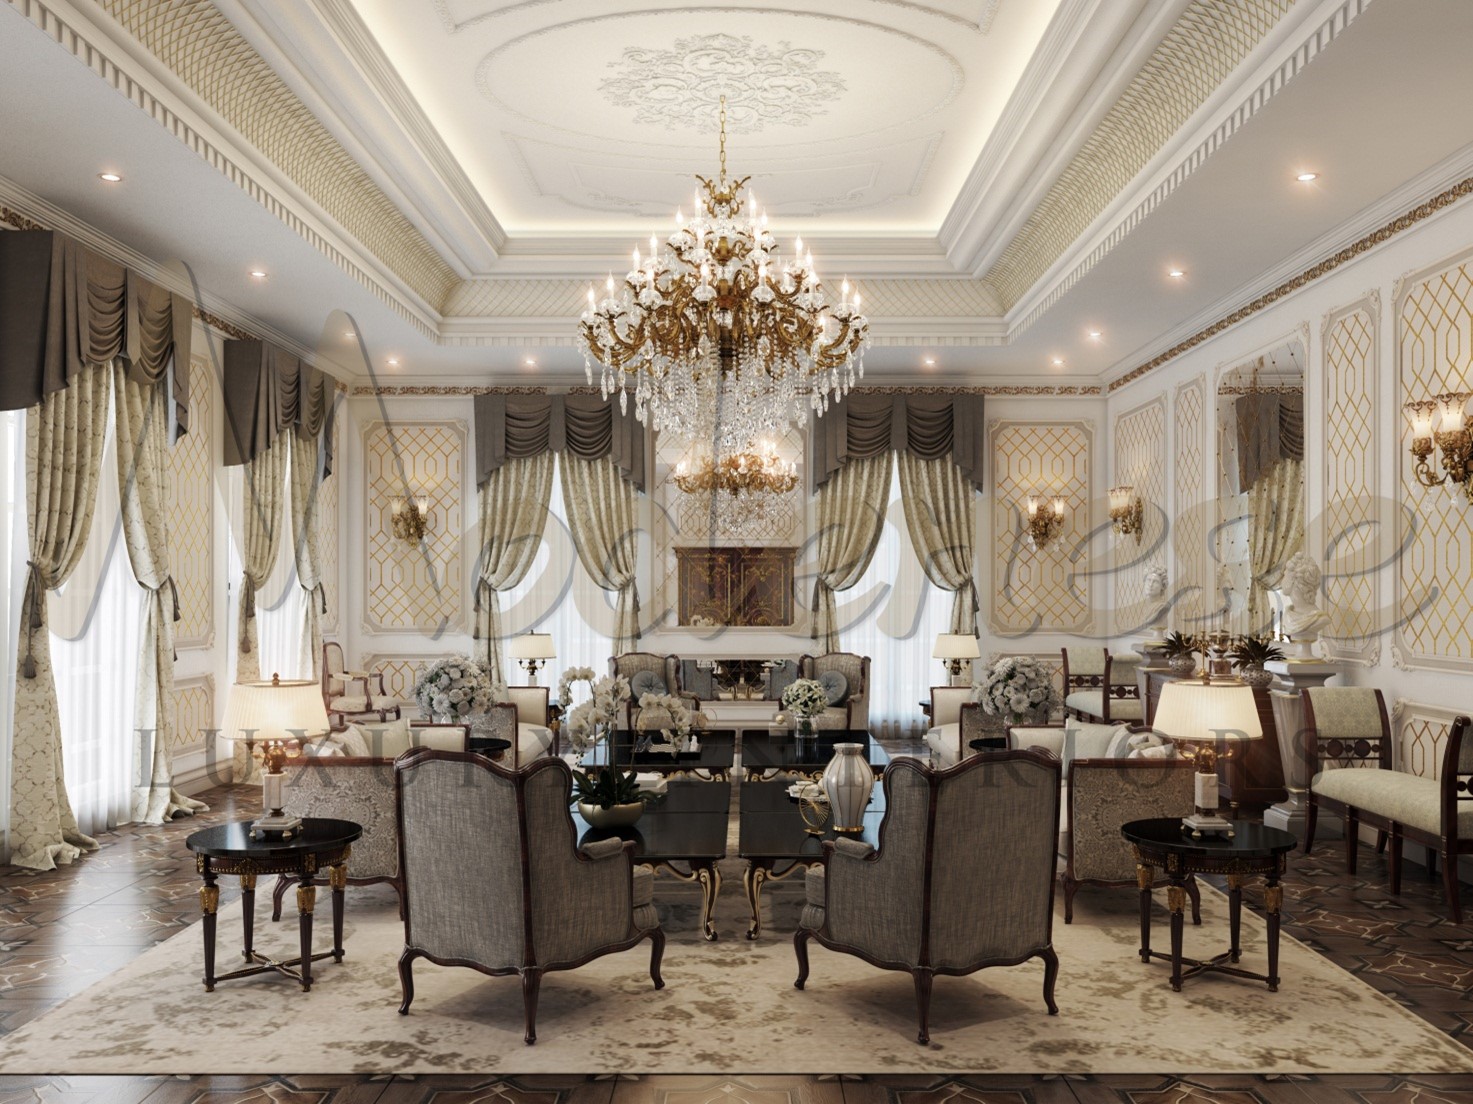 The significance of traditional interior design